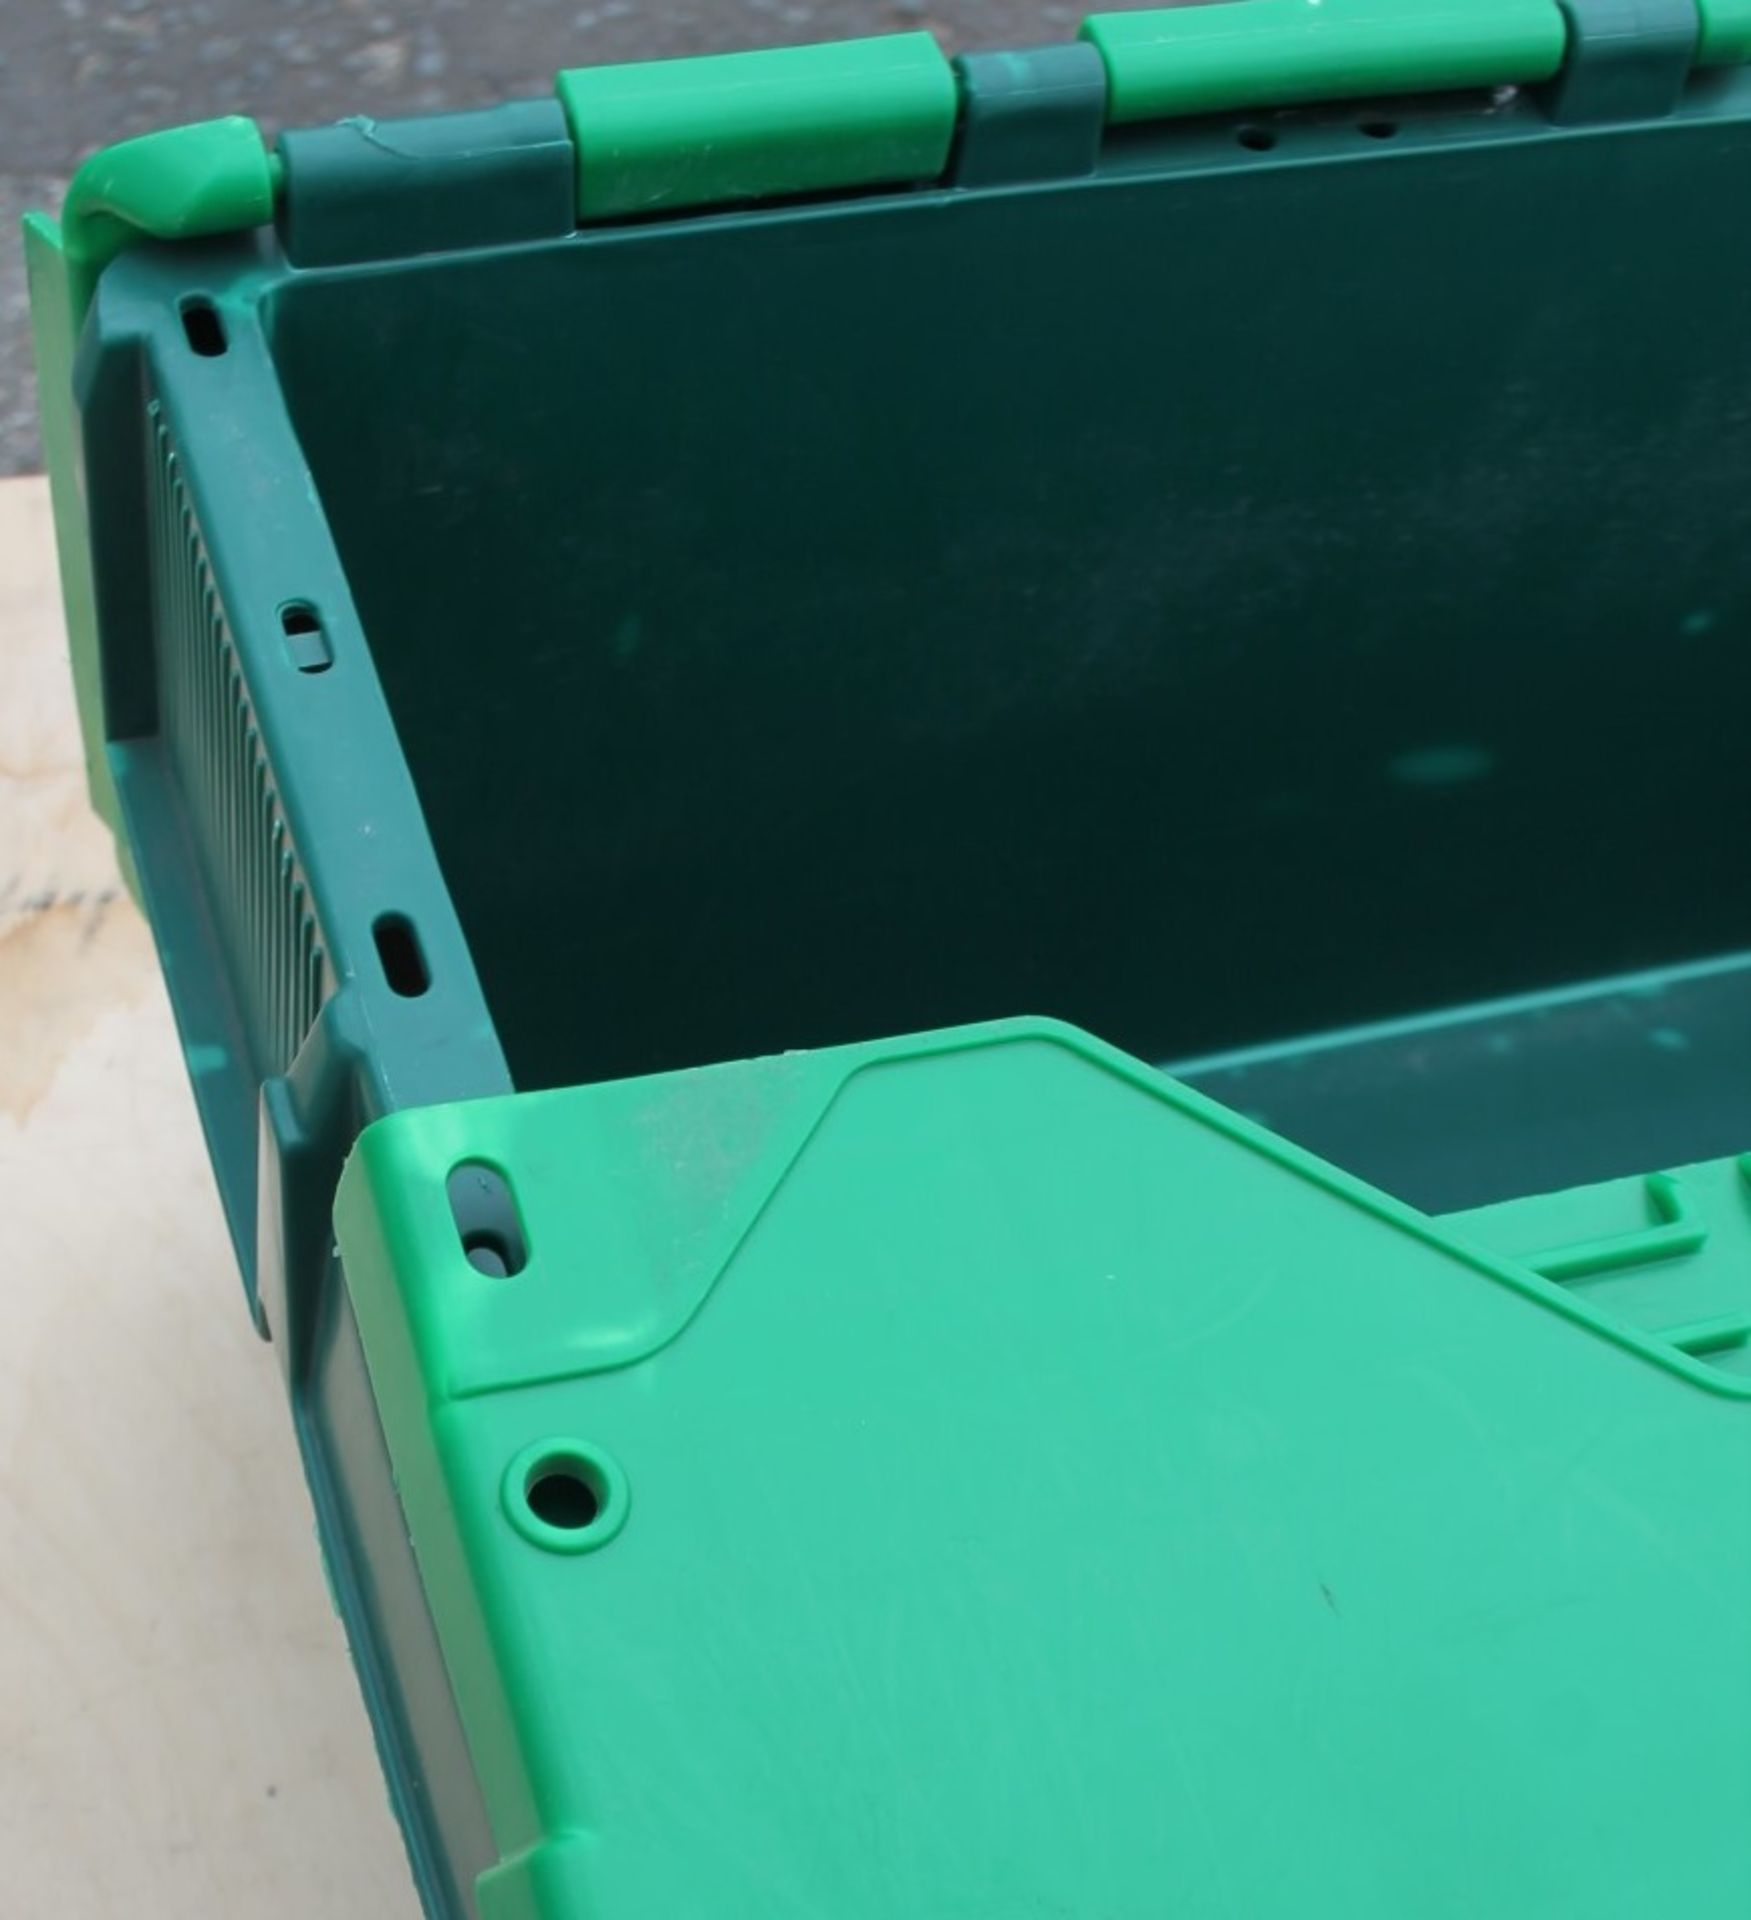 20 x Robust Low Profile Green Plastic Secure Storage Boxes With Attached Hinged Lids - Dimensions: - Image 6 of 6